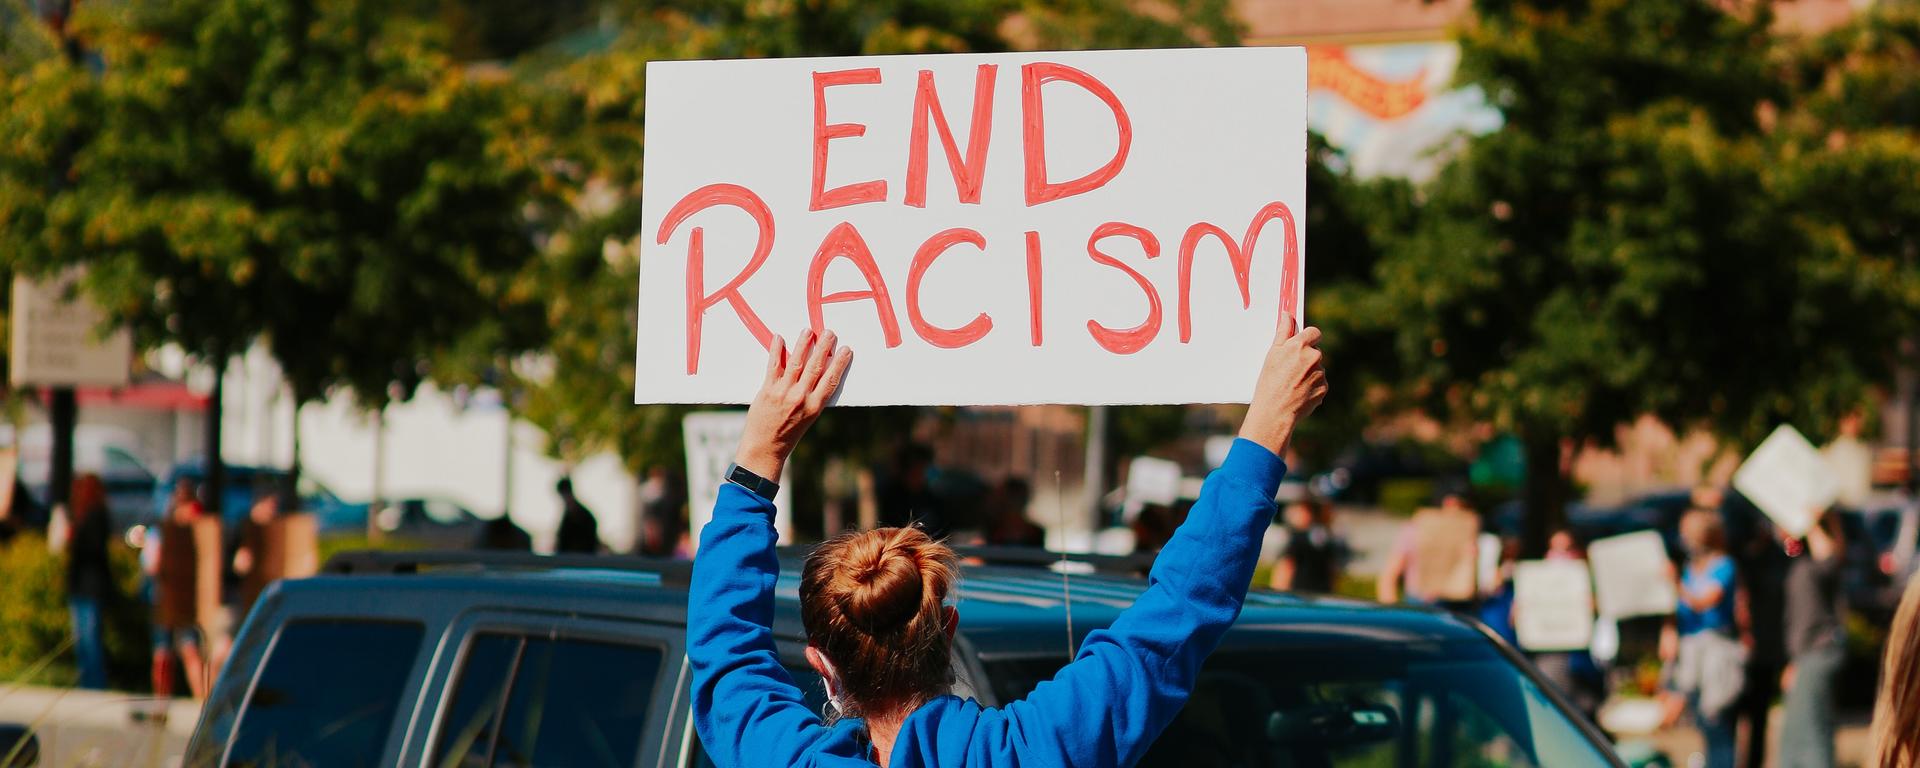 A woman faces traffic and holds up a sign that says "End Racism"